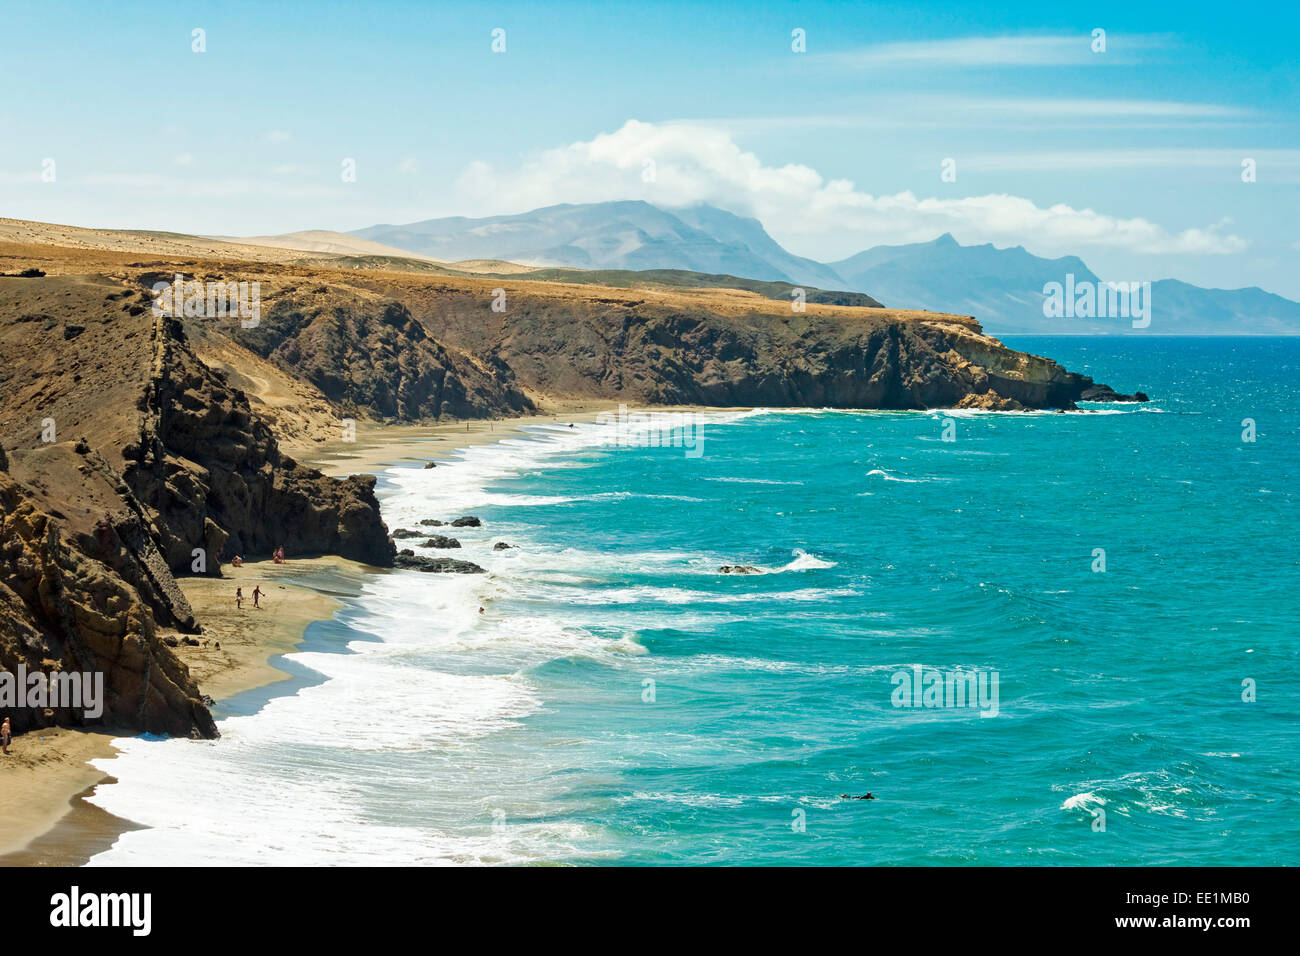 La Pared surf beach and Parque Natural Jandia mountains beyond on the southwest coast, La Pared, Fuerteventura, Canary Islands Stock Photo